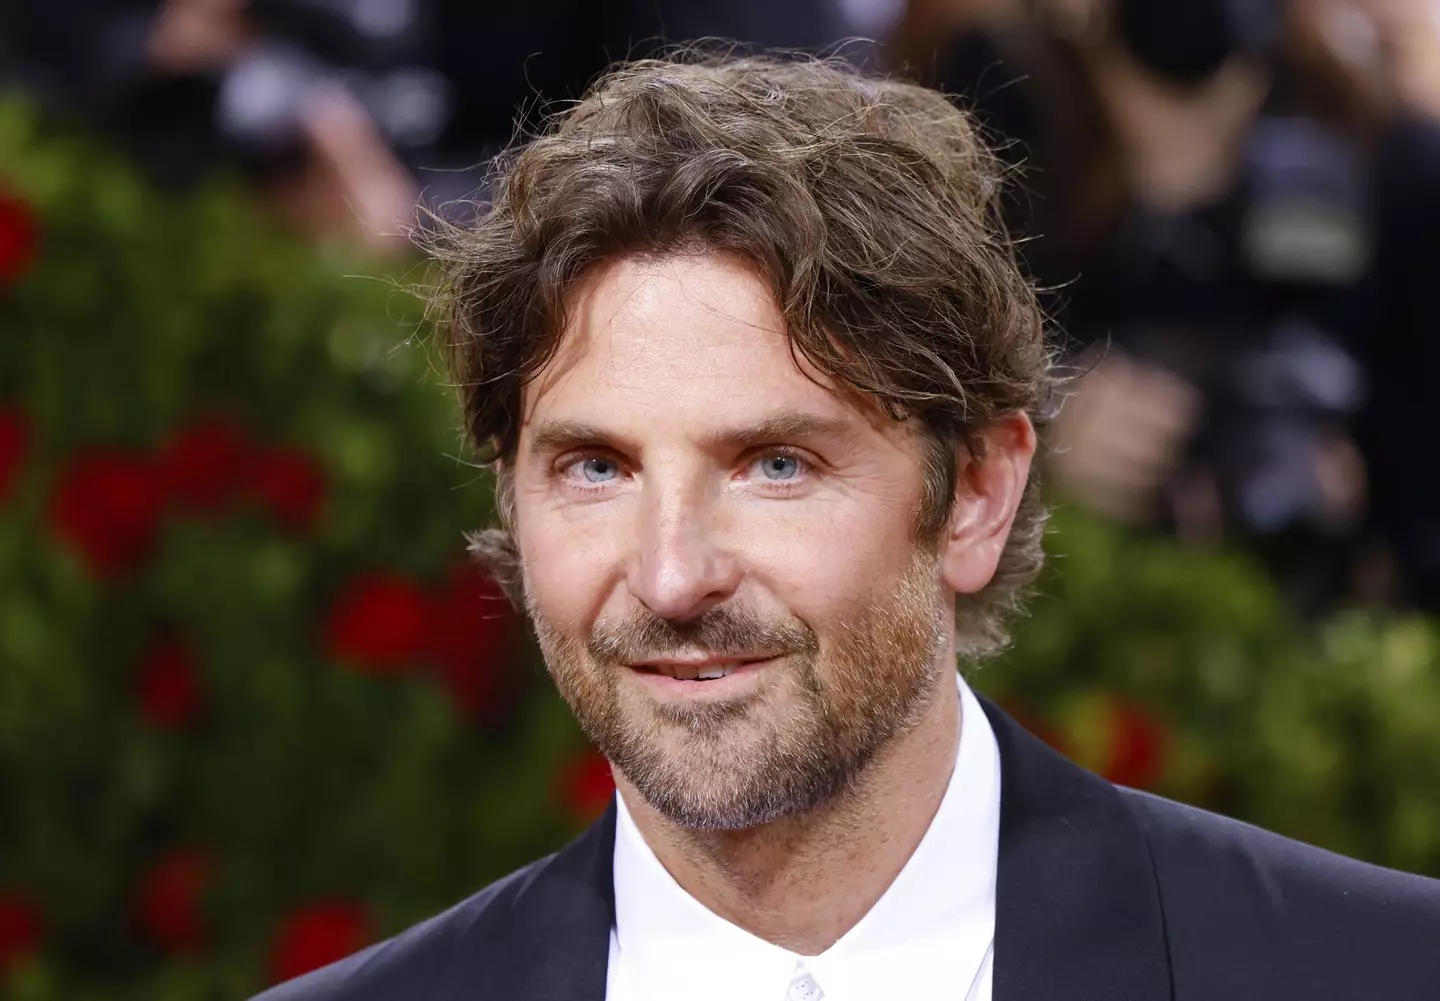 Actor and director Bradley Cooper says he has been mocked for his Oscar nominations.